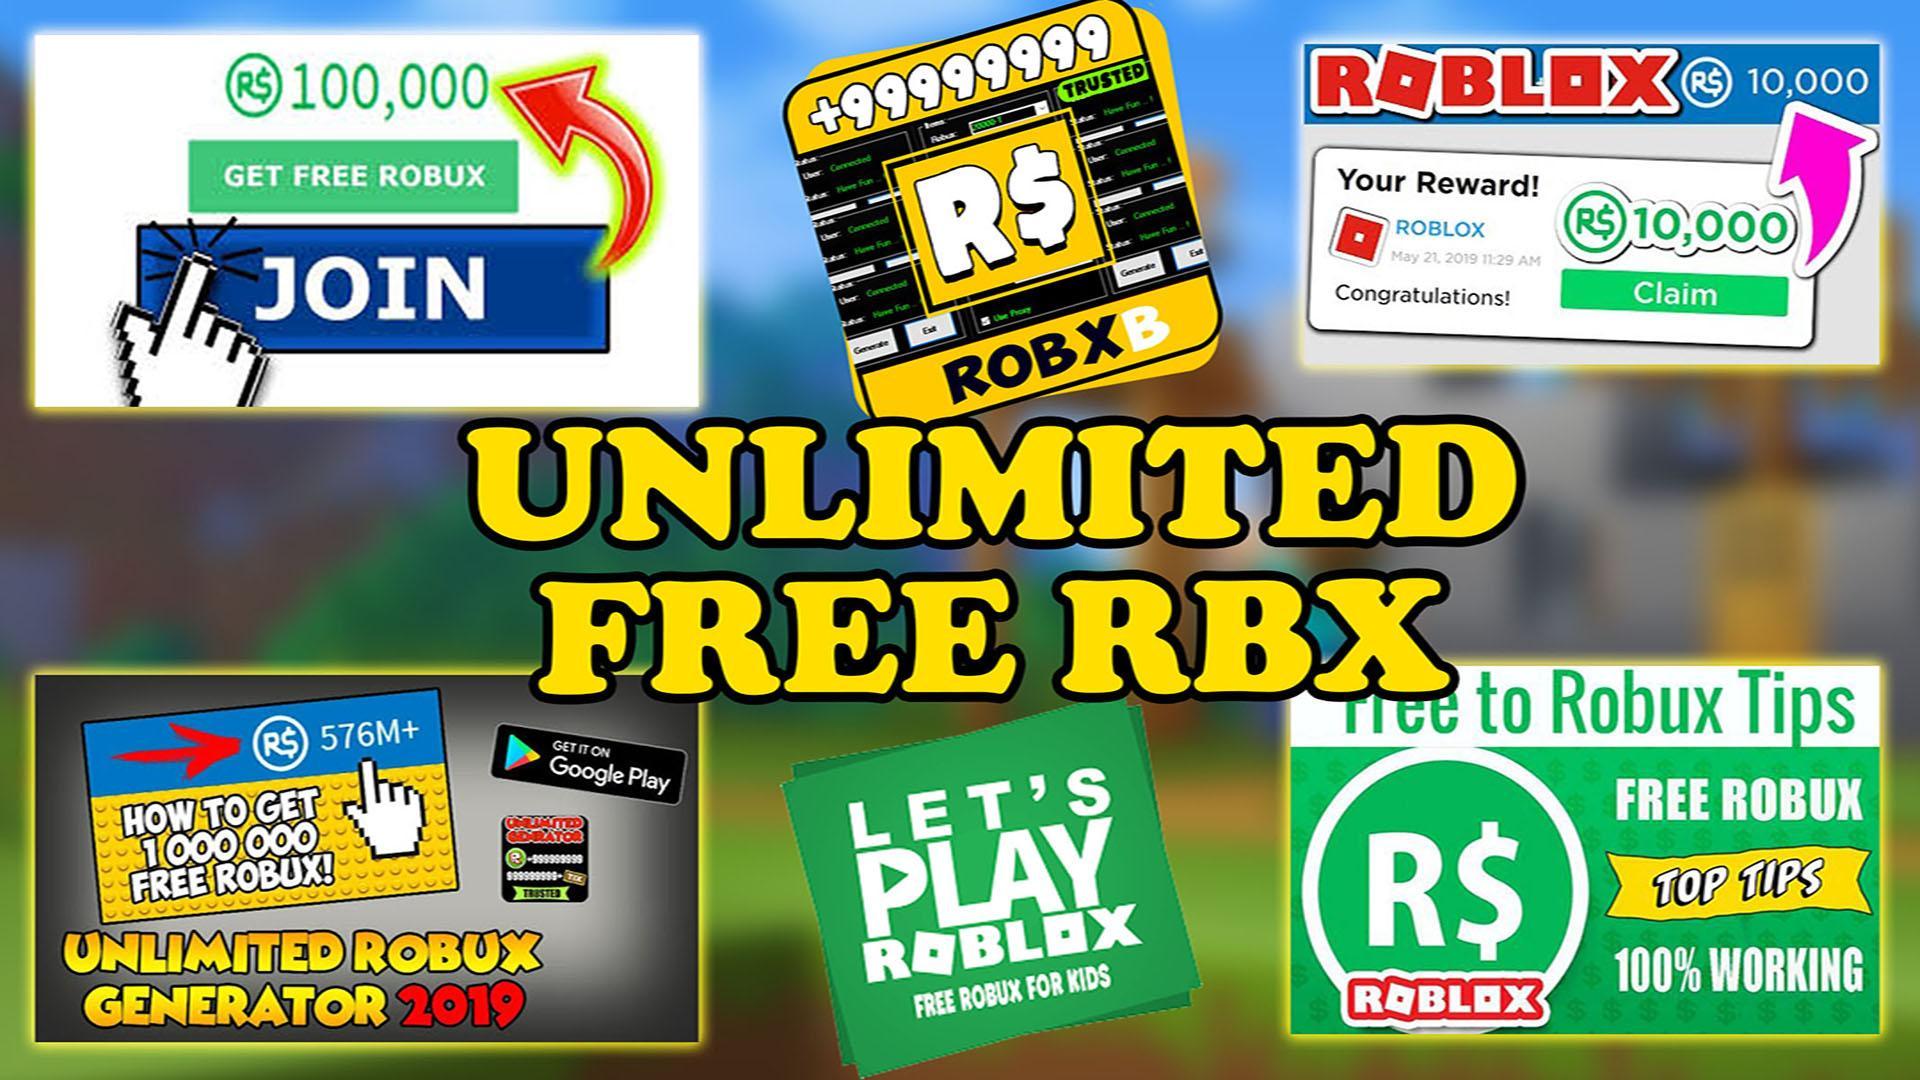 Free Robux Tricks Unlimitedrobux General Guide2019 For Android Apk Download - free robux for kids.com